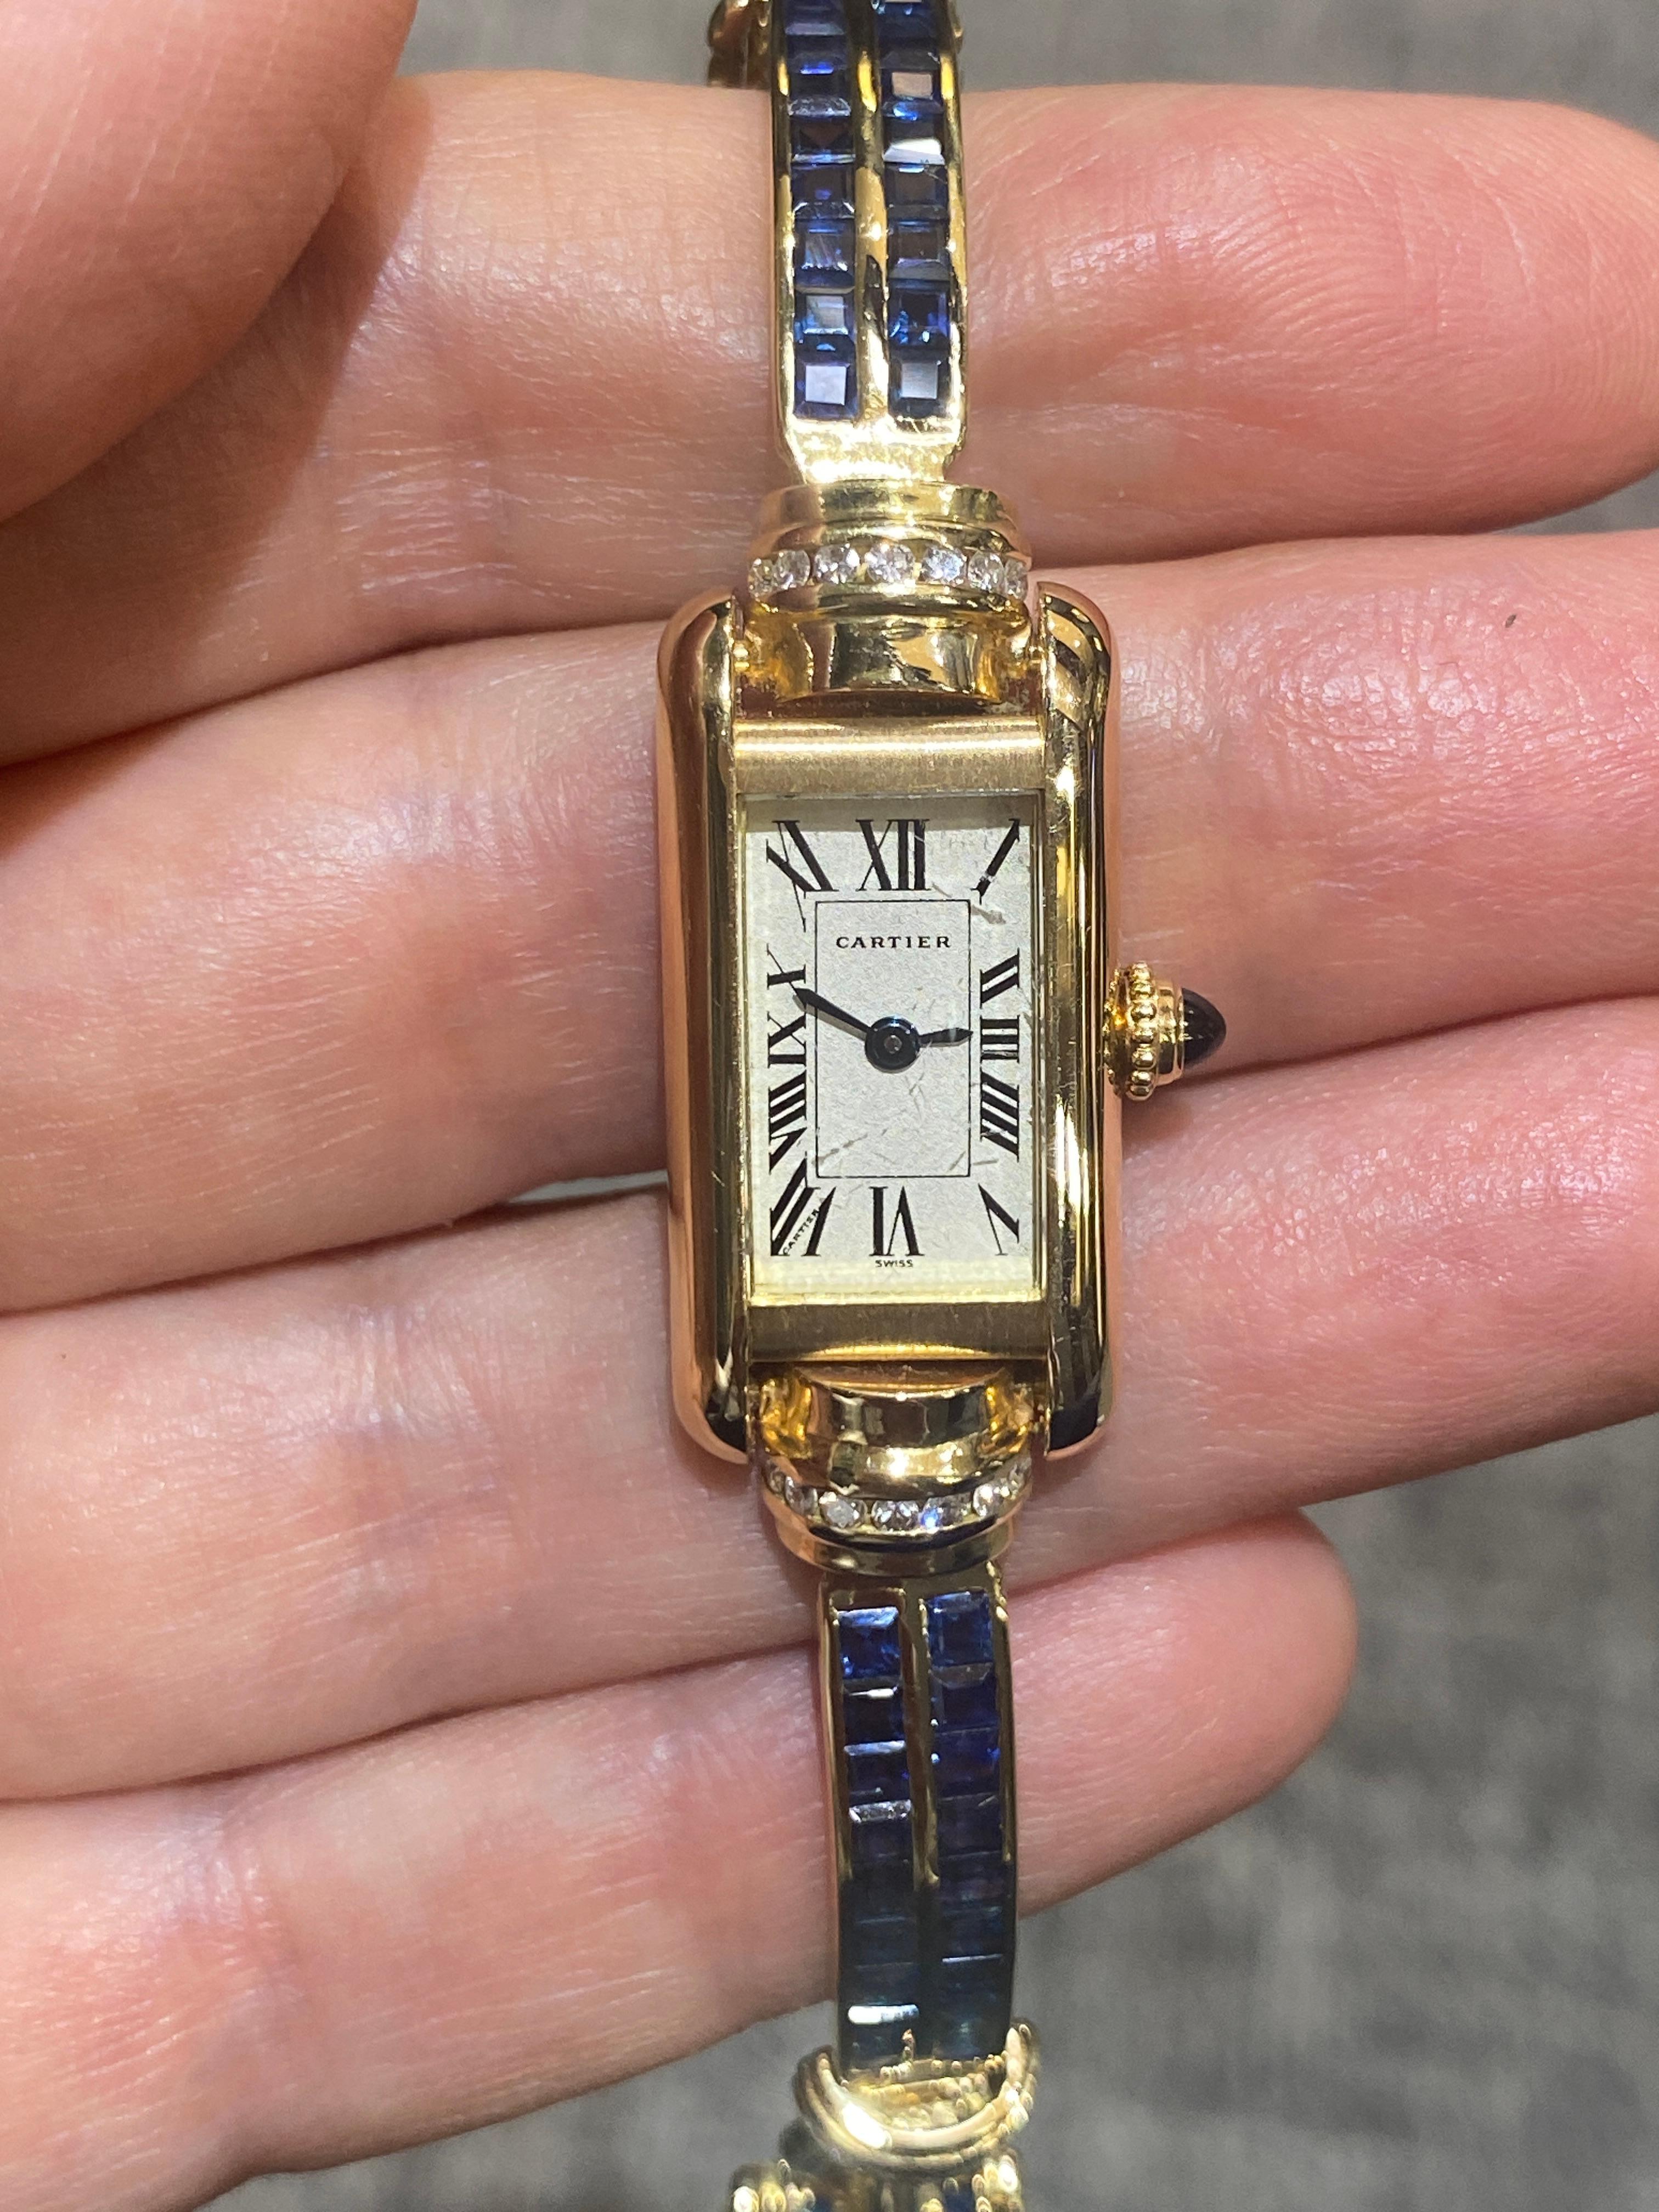 This rare Cartier Tank watch has an 18k gold bracelet adorned with round cut diamonds and invisible setting sapphires. The length of the bracelet is 17cm. It is a stunning piece.